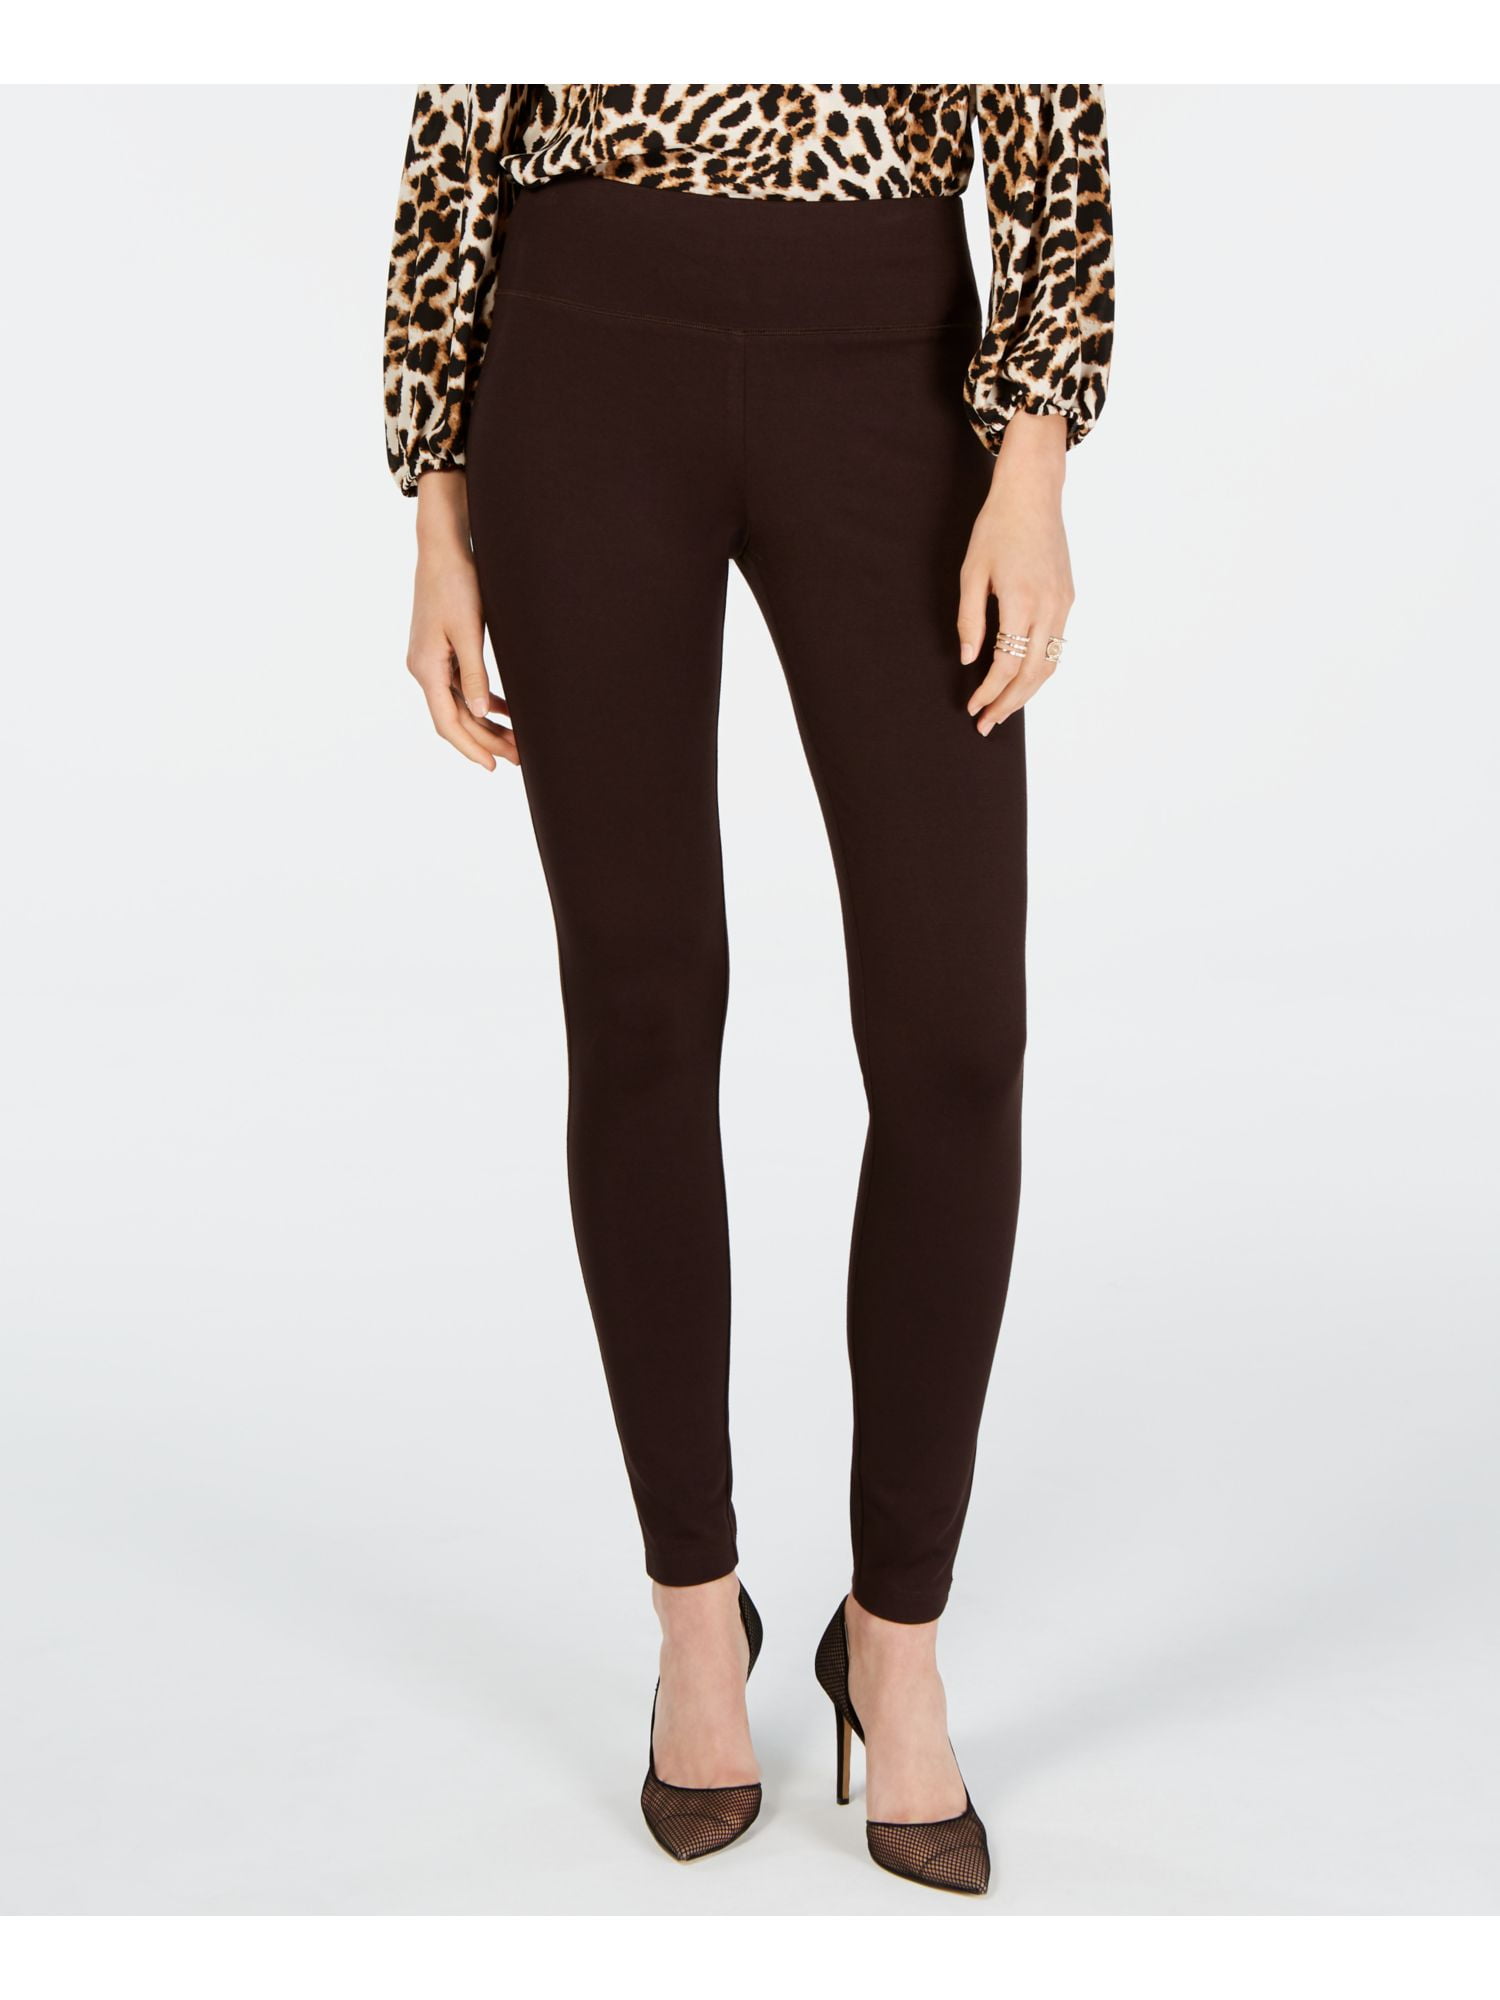 Wild Fable Women's High-Waisted Classic Leggings -, Brown Leopard